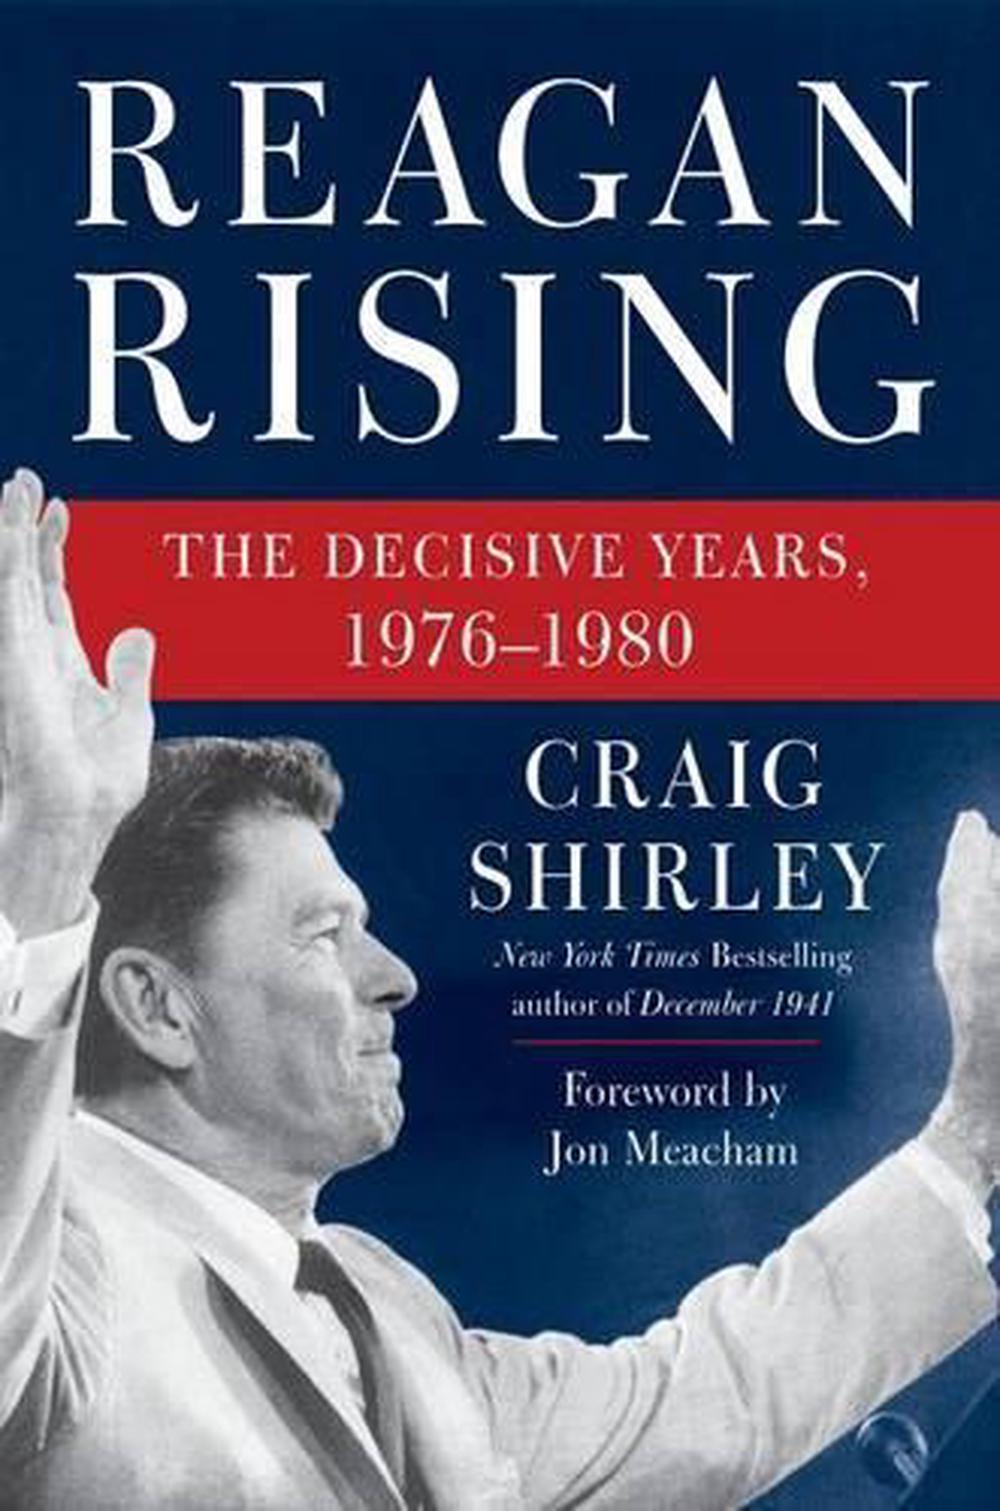 Reagan Rising: The Decisive Years, 1976-1980 by Craig ...